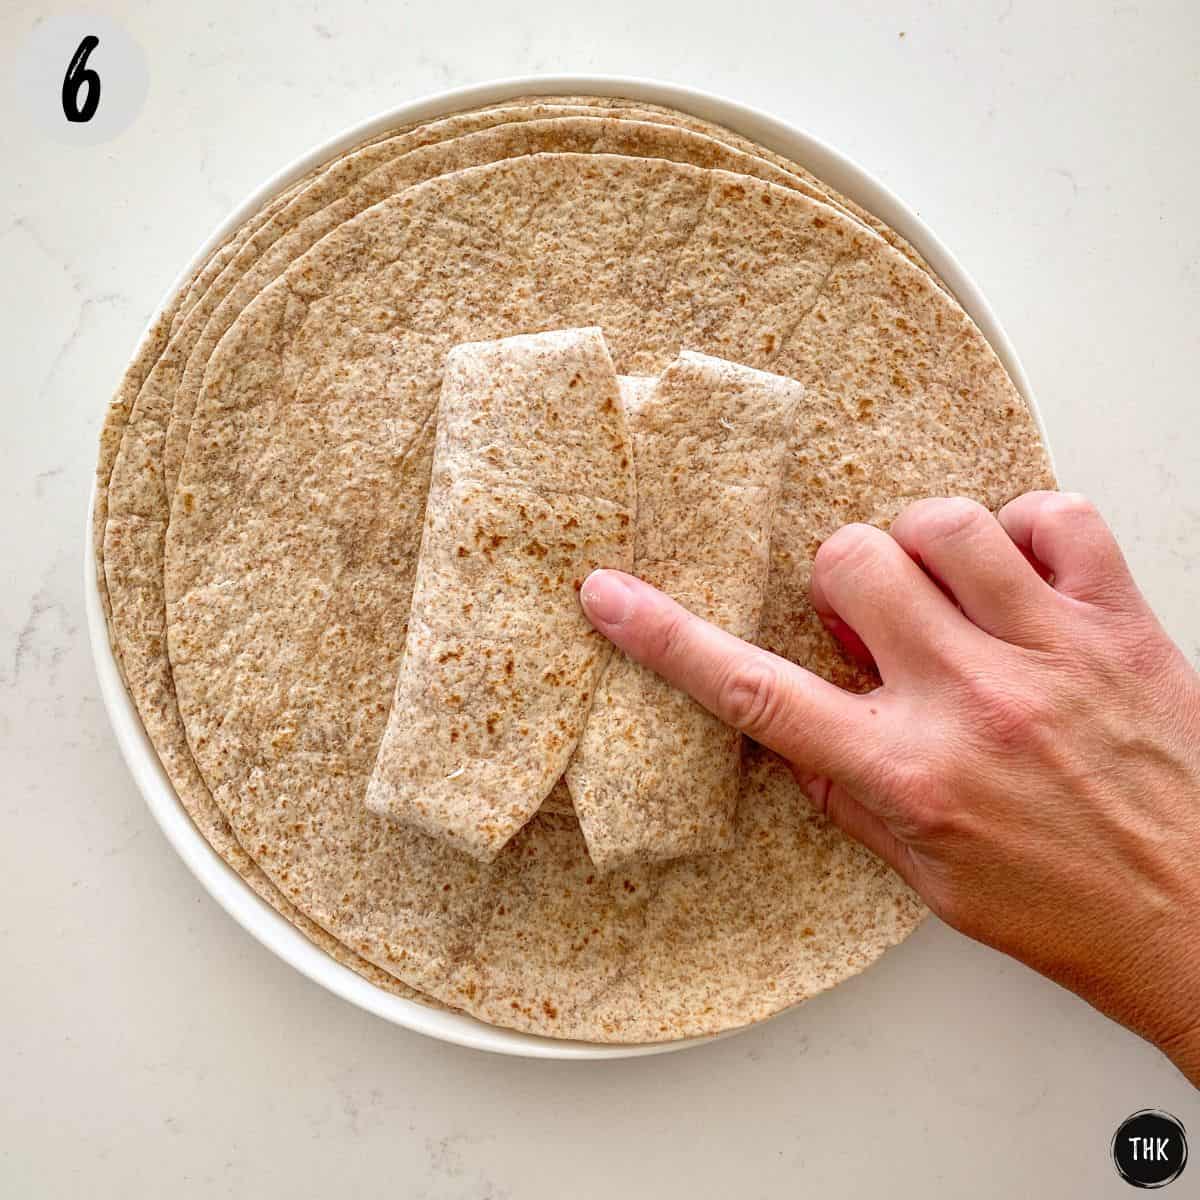 Hand holding closed a stuffed tortilla wrap on white plate.